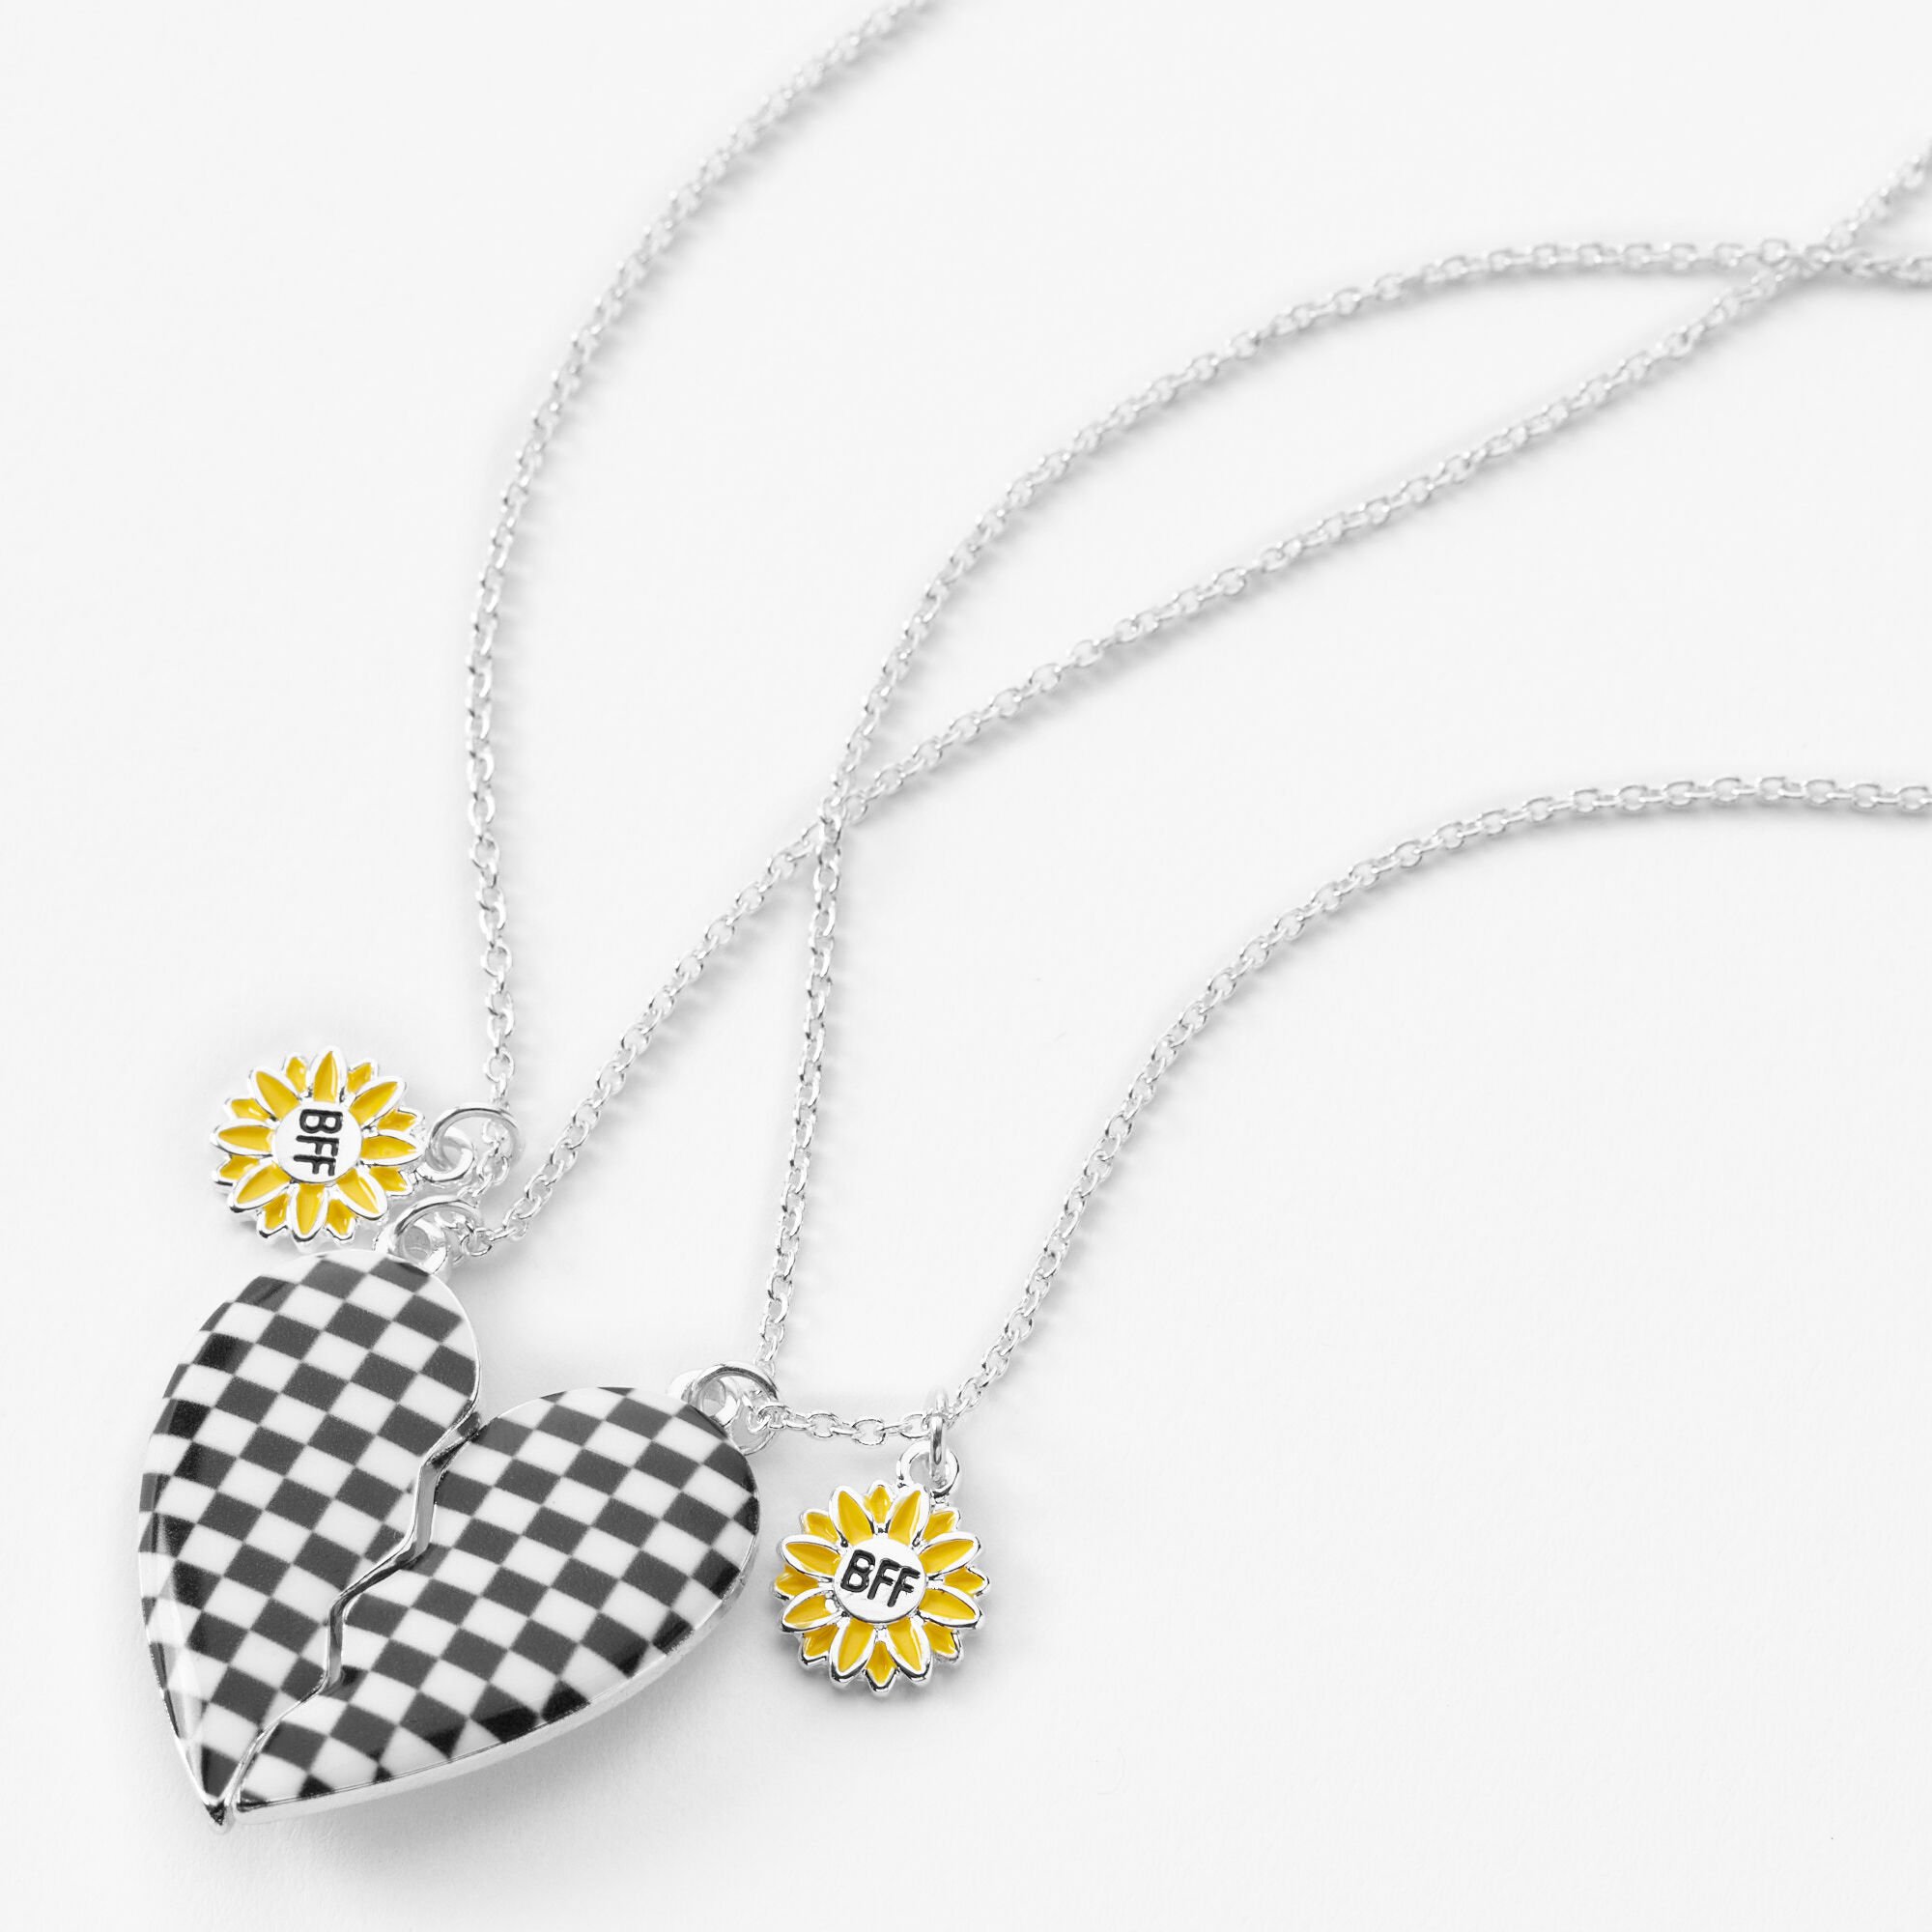 View Claires Best Friends Daisy Checkered Split Heart Necklaces 2 Pack White information